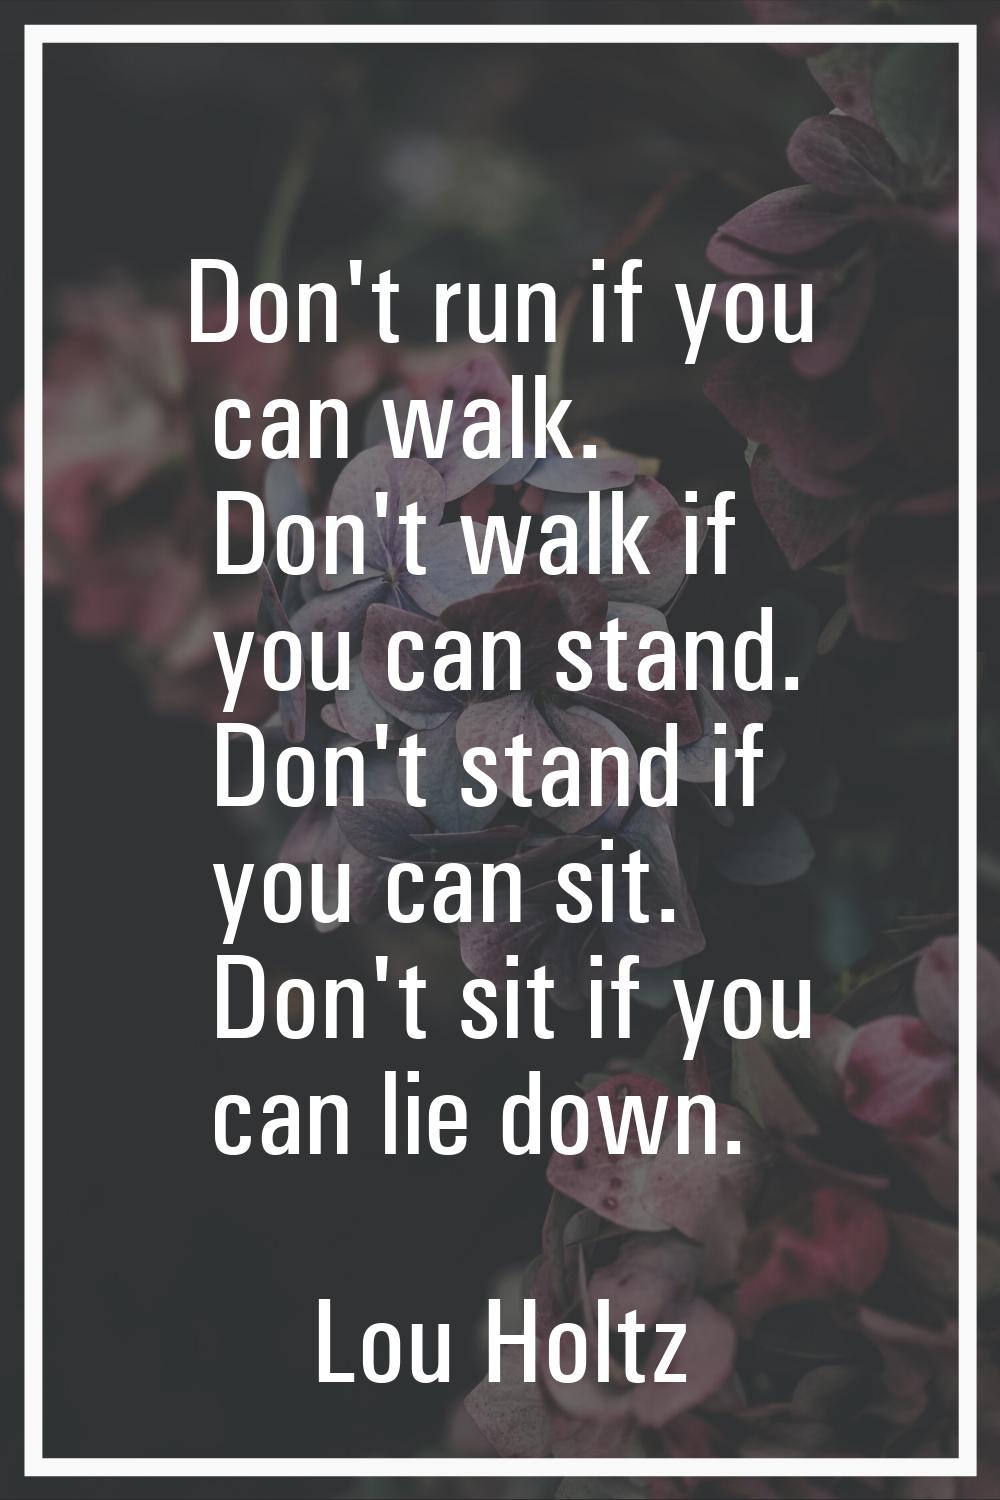 Don't run if you can walk. Don't walk if you can stand. Don't stand if you can sit. Don't sit if yo